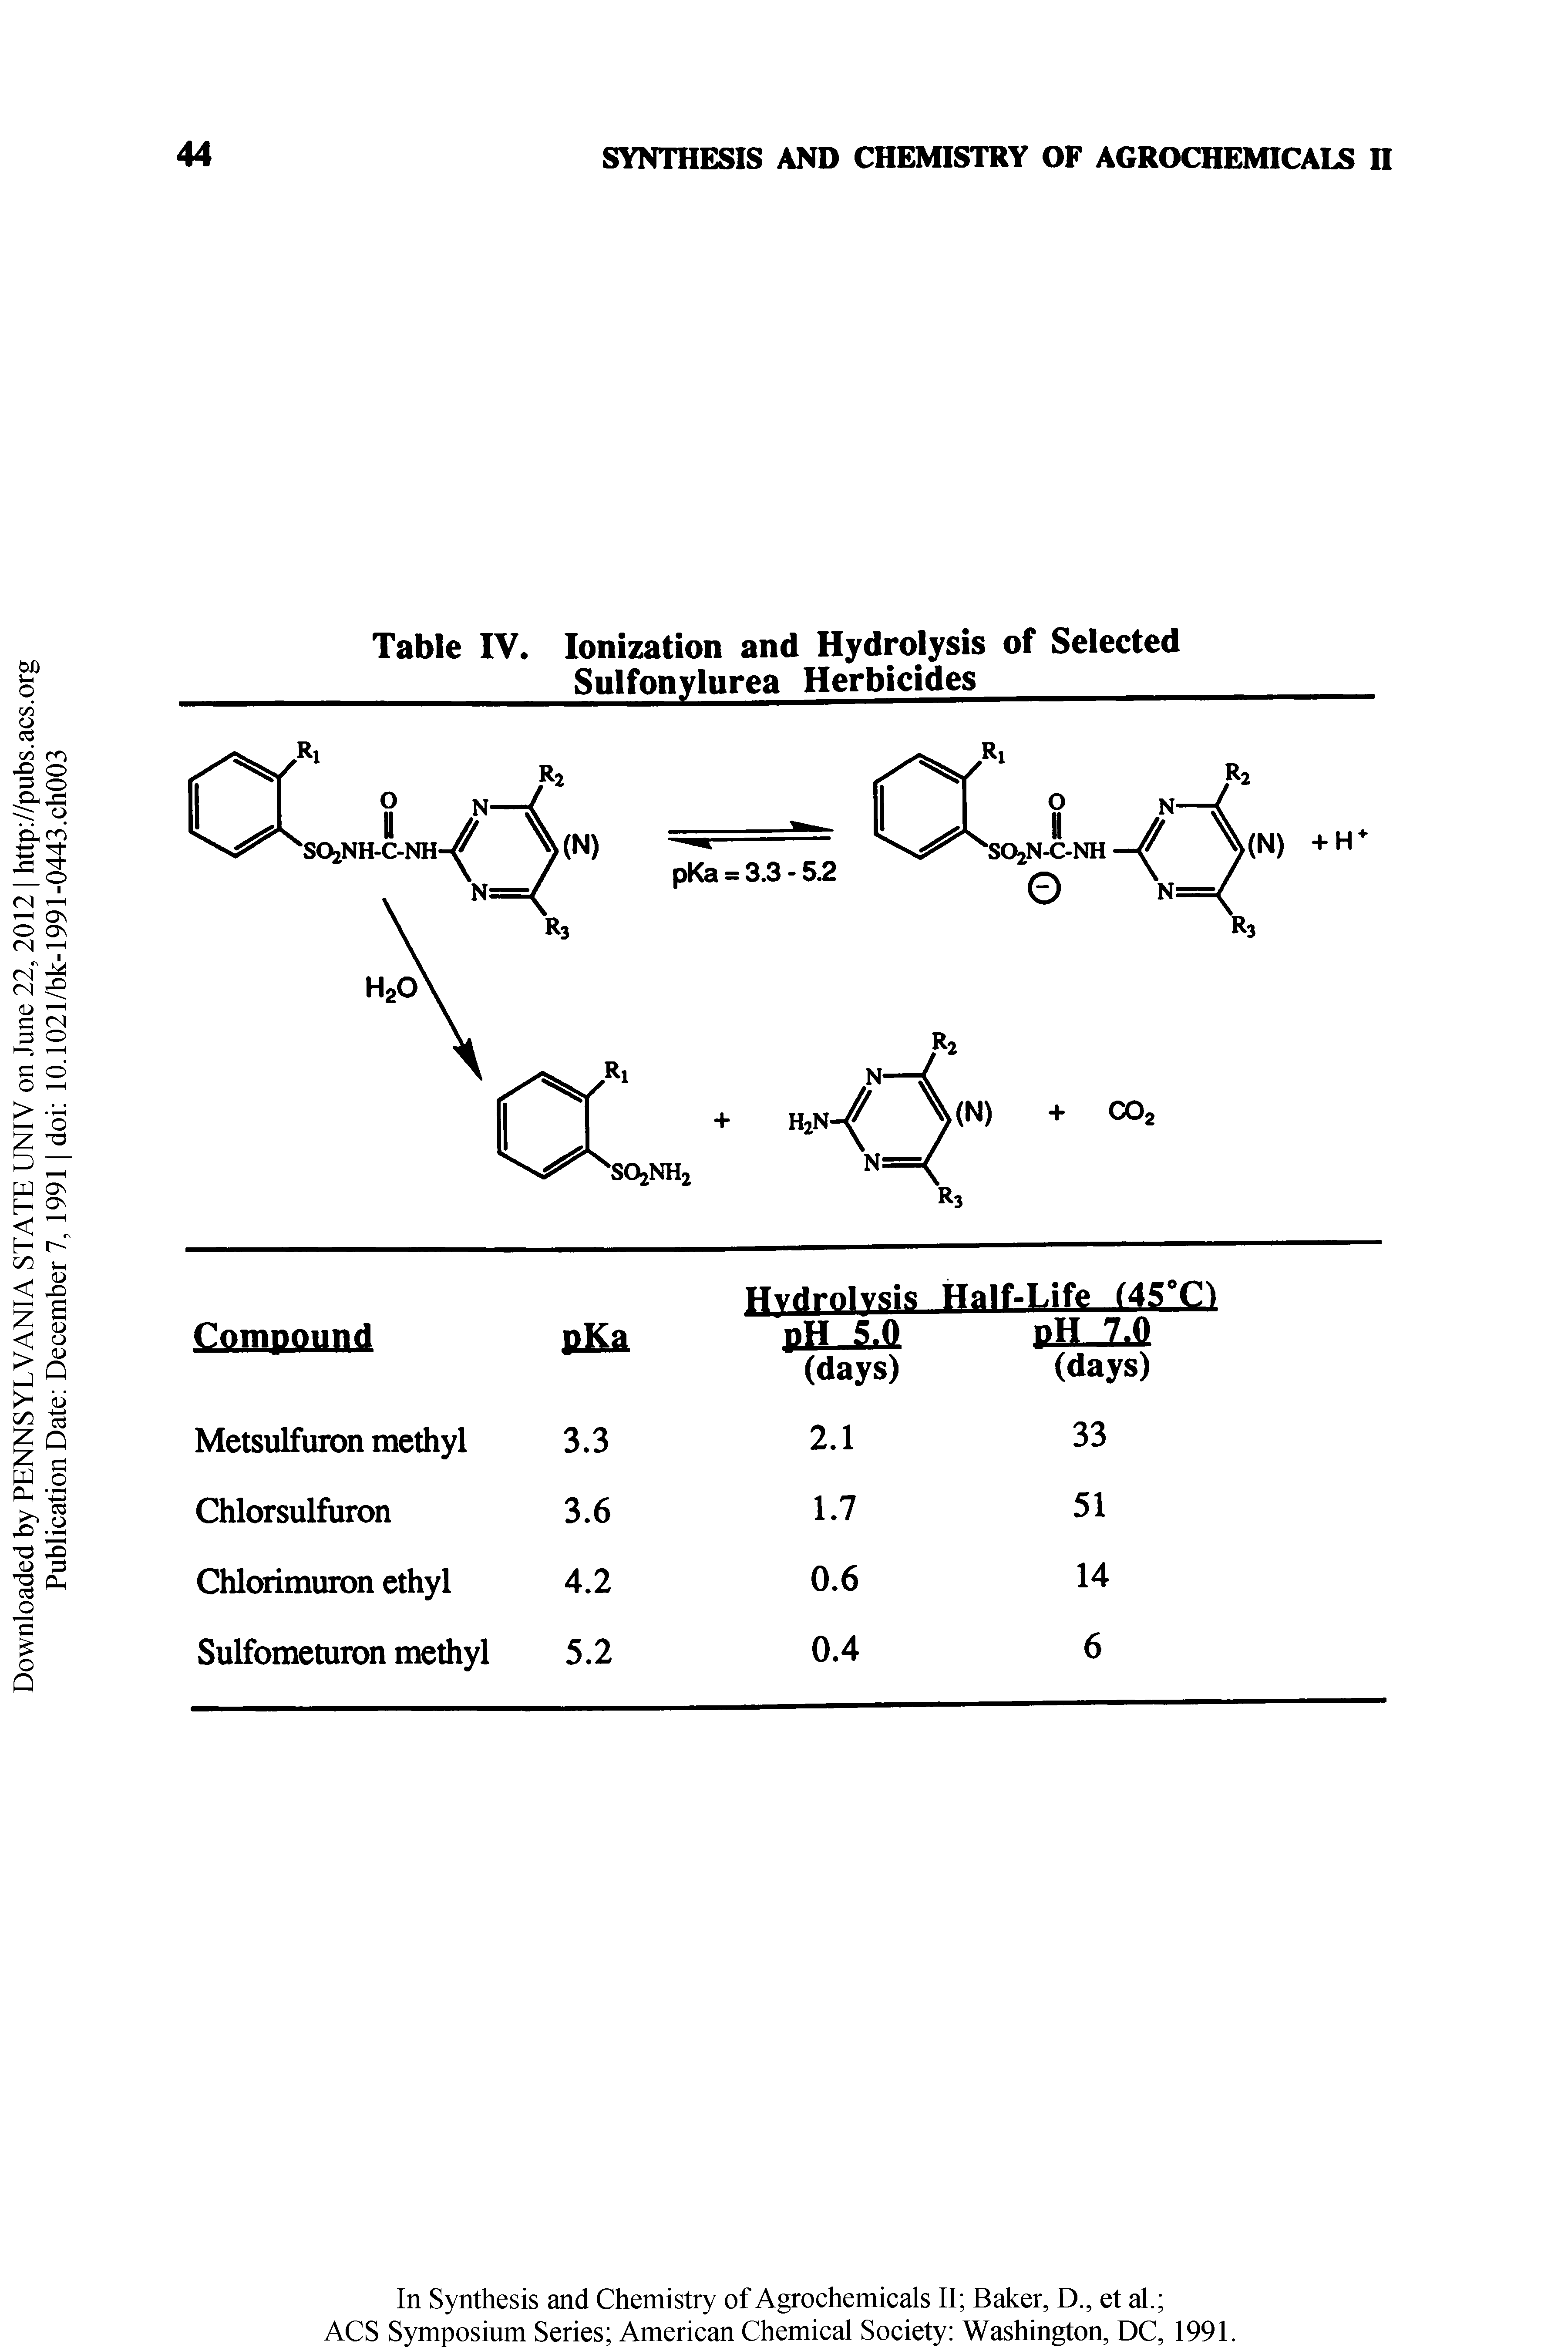 Table IV. Ionization and Hydrolysis of Selected Sulfonylurea Herbicides ...